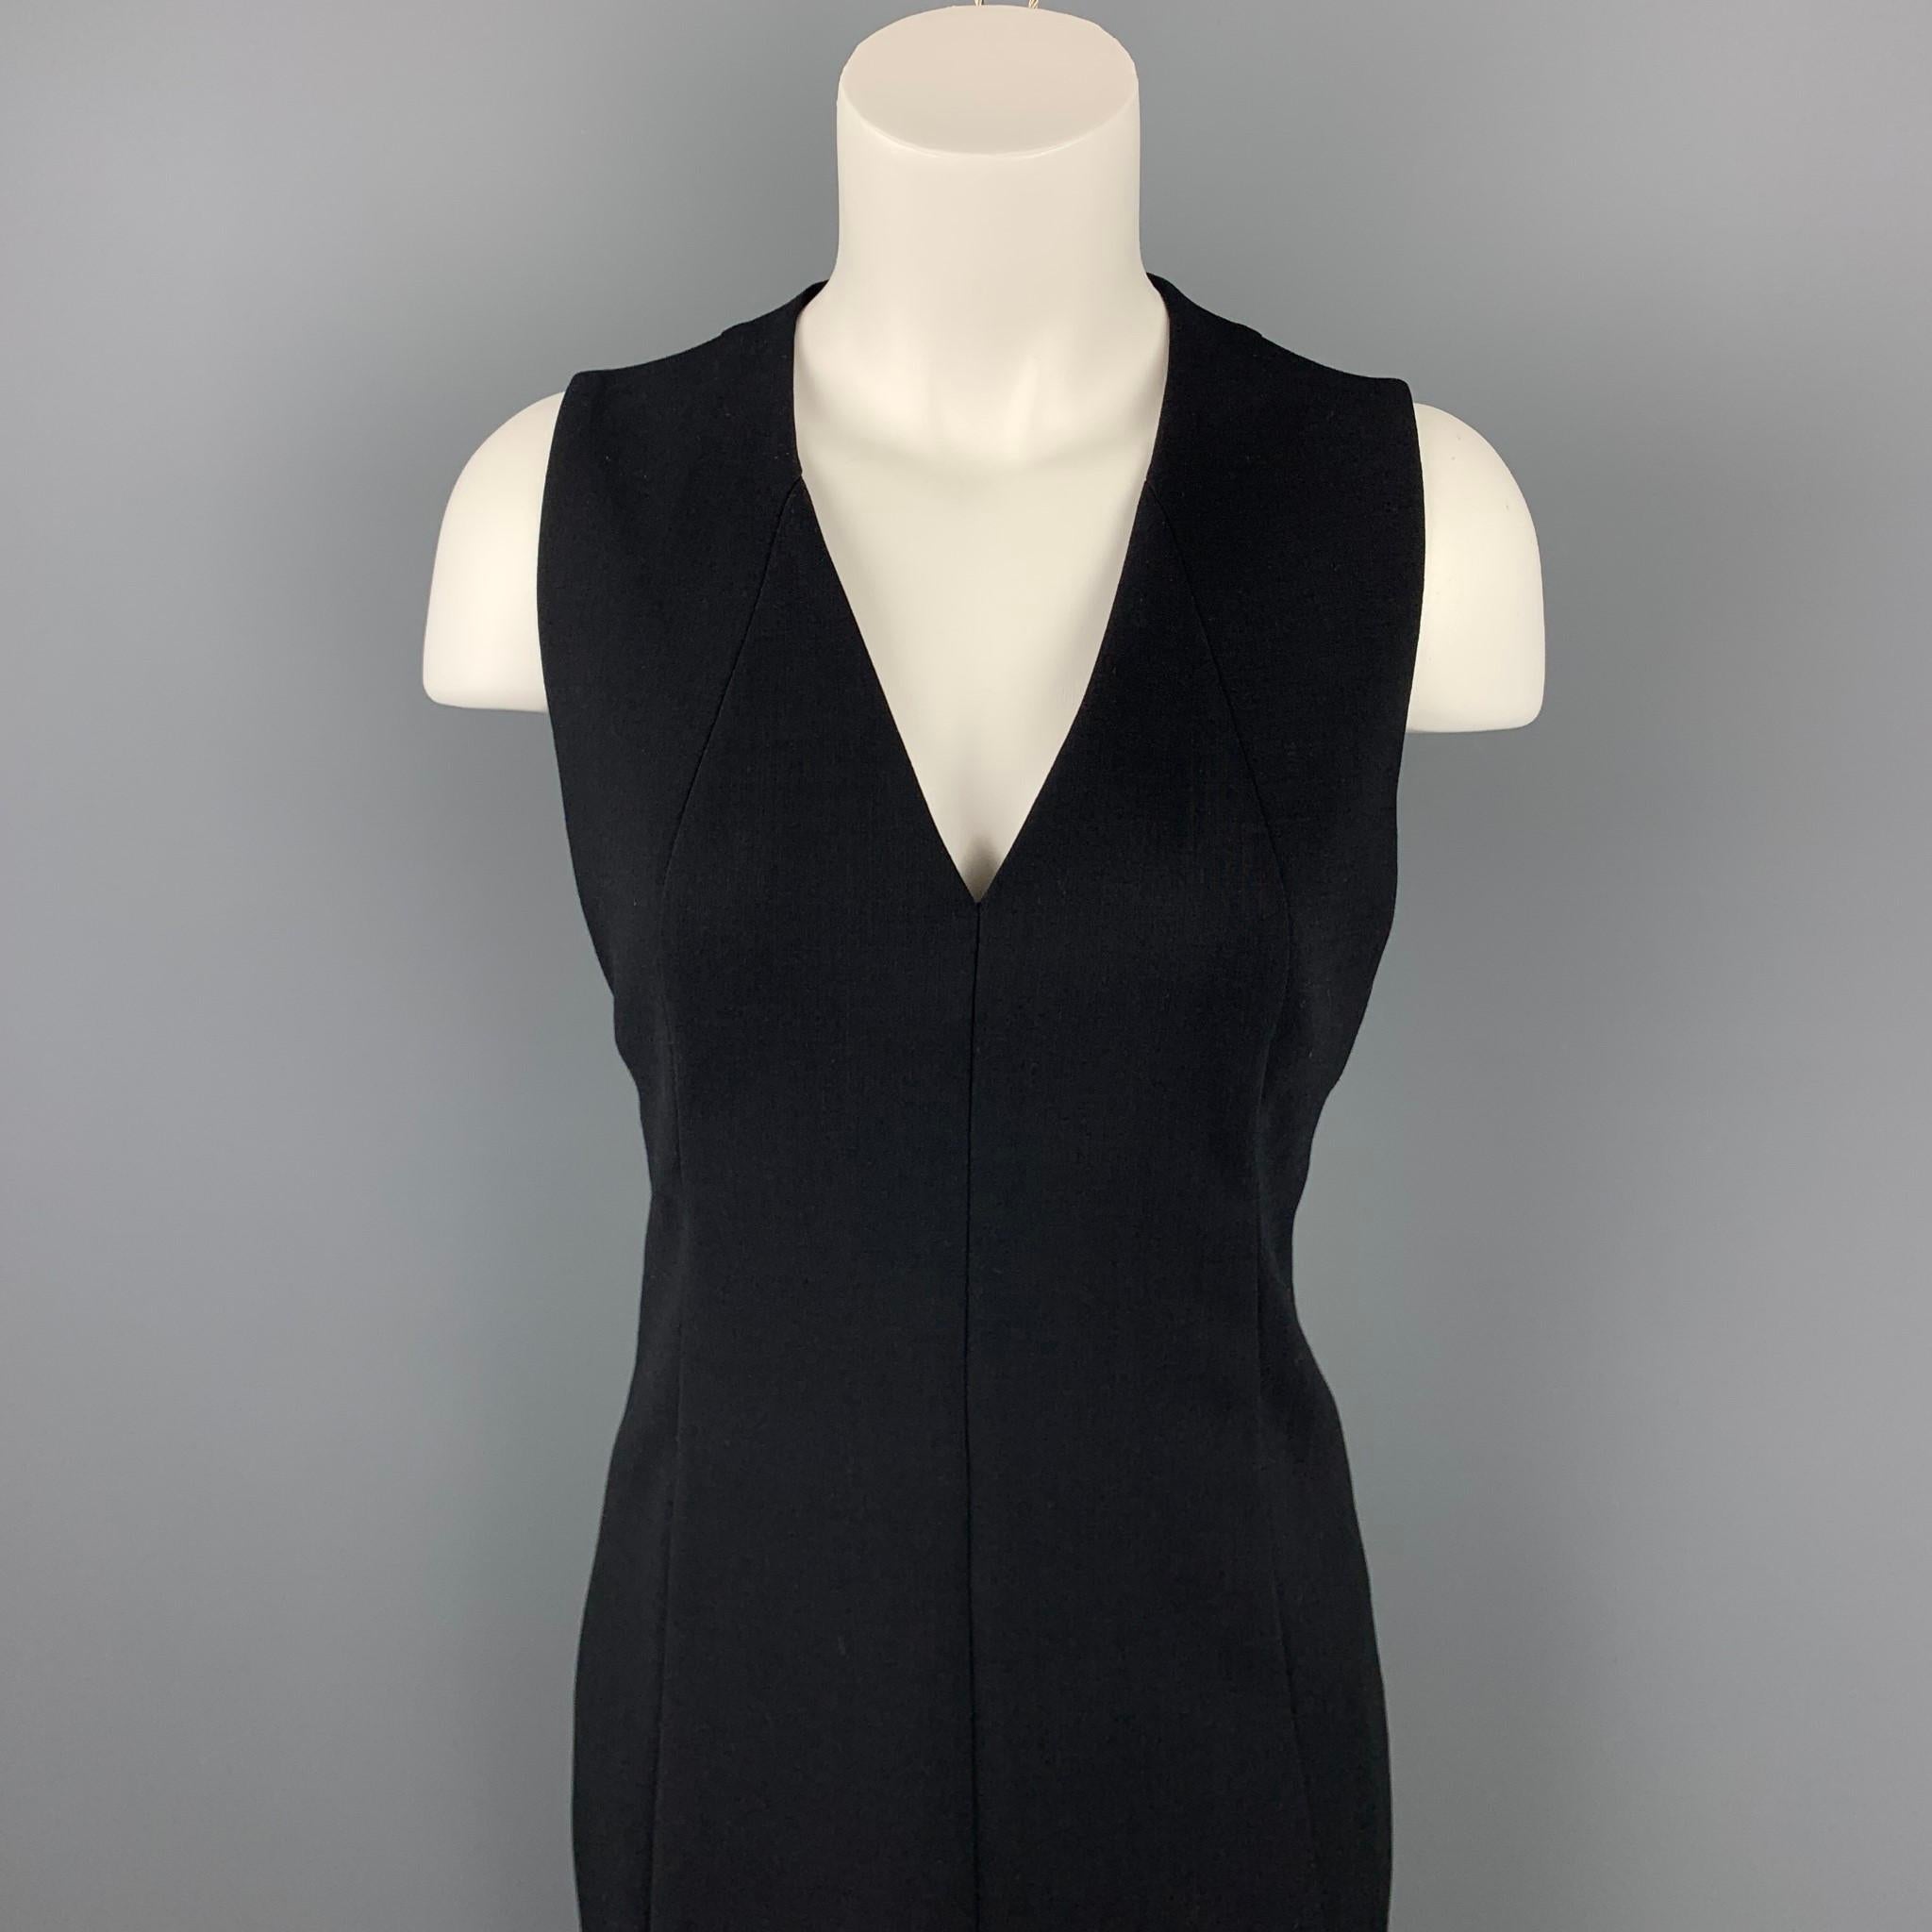 AKRIS dress comes in a black wool / nylon with a silk liner featuring a shift style, v-neck, and a back zip up closure.

Very Good Pre-Owned Condition.
Marked: US 6 / F 38 / D 36
Original Retail Price: $1,990.00

Measurements:

Shoulder: 13 in.